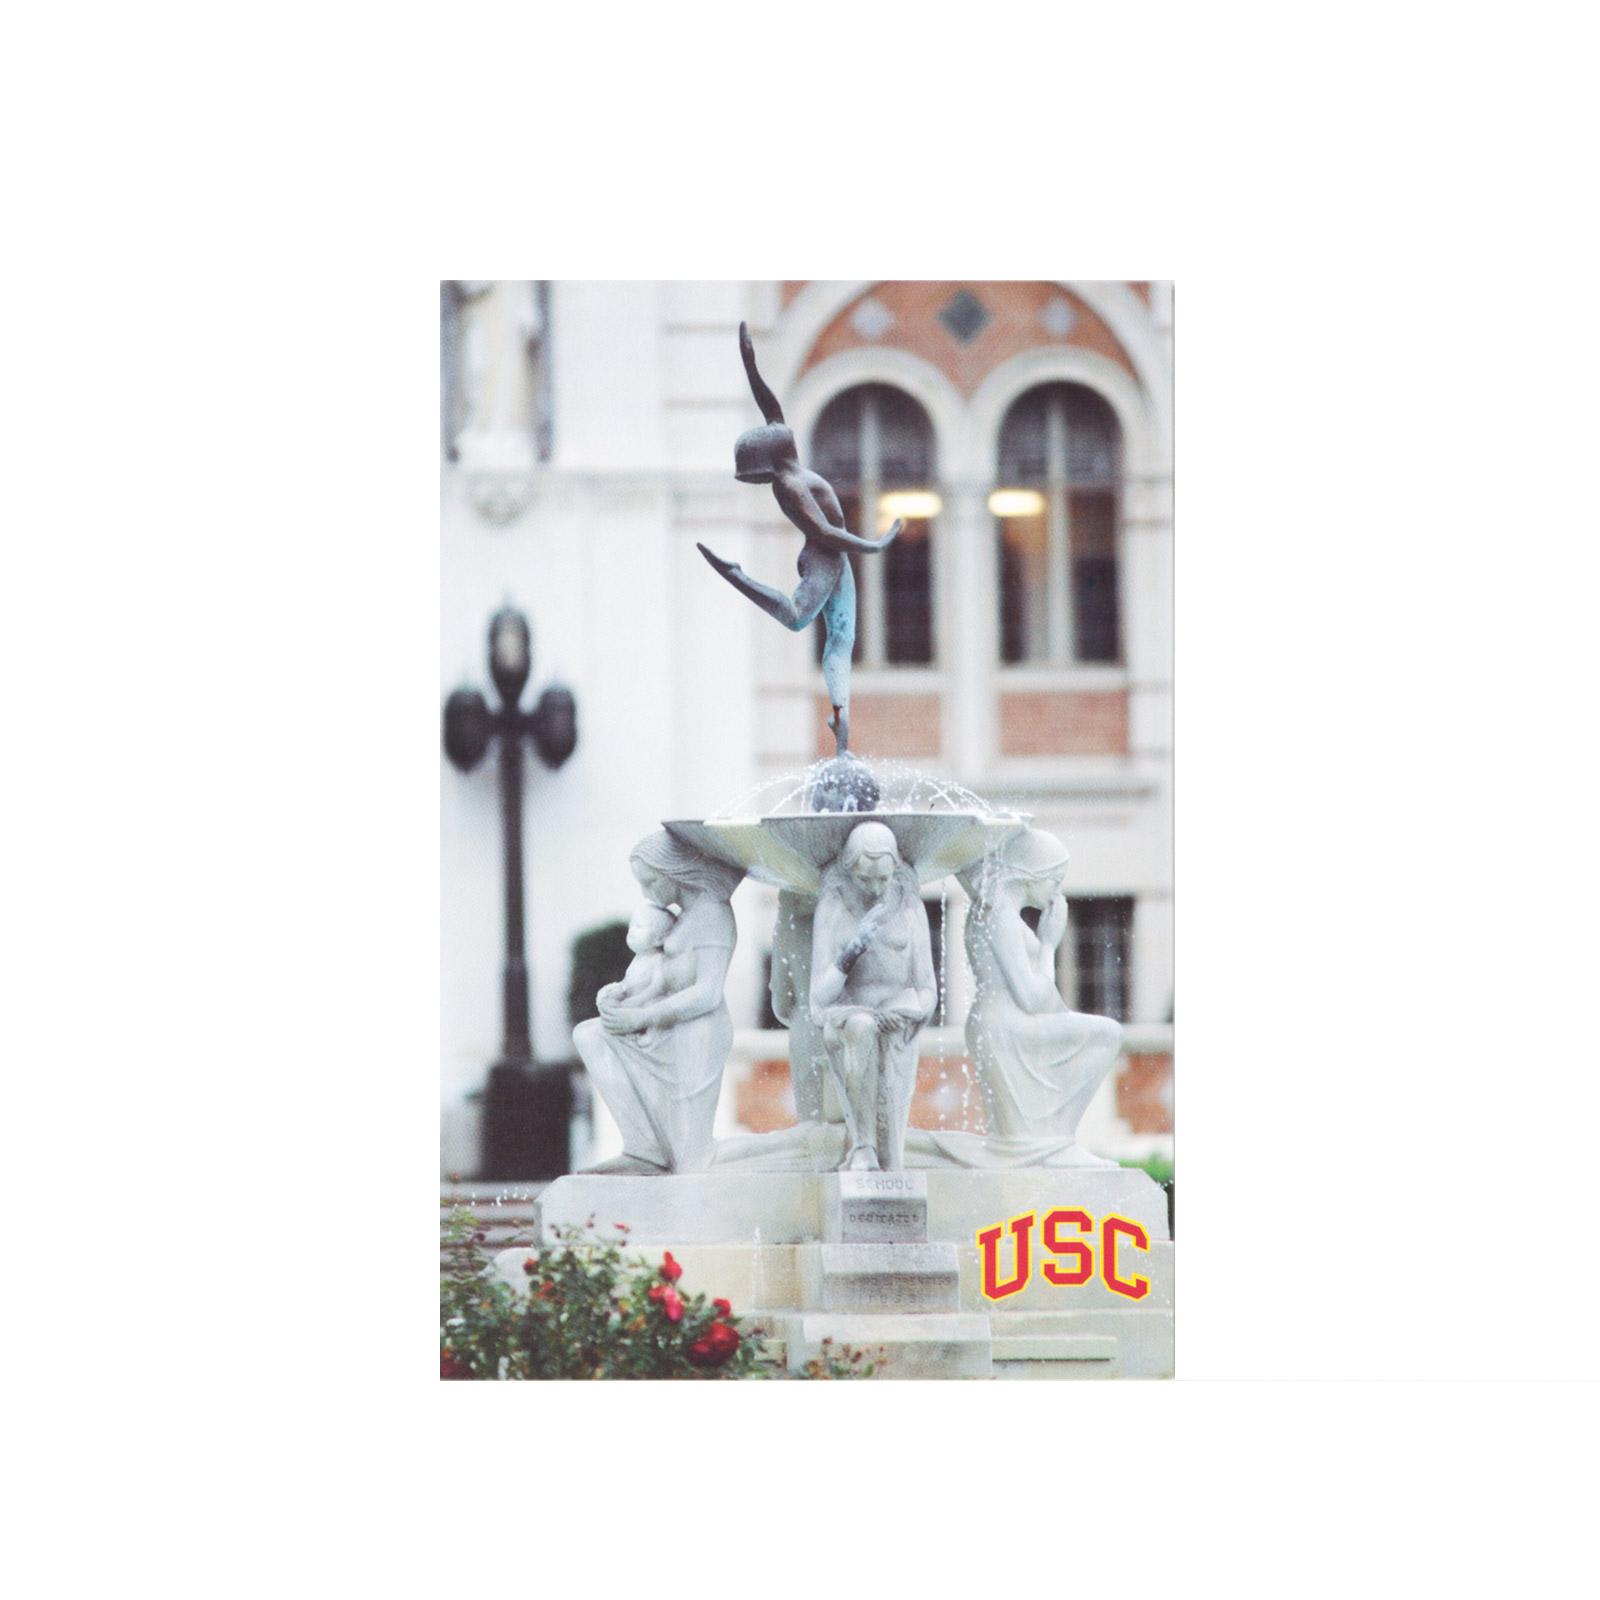 USC YOUTH TRIUMPHANT FOUNTAIN POSTCARD BY PIN USA image01